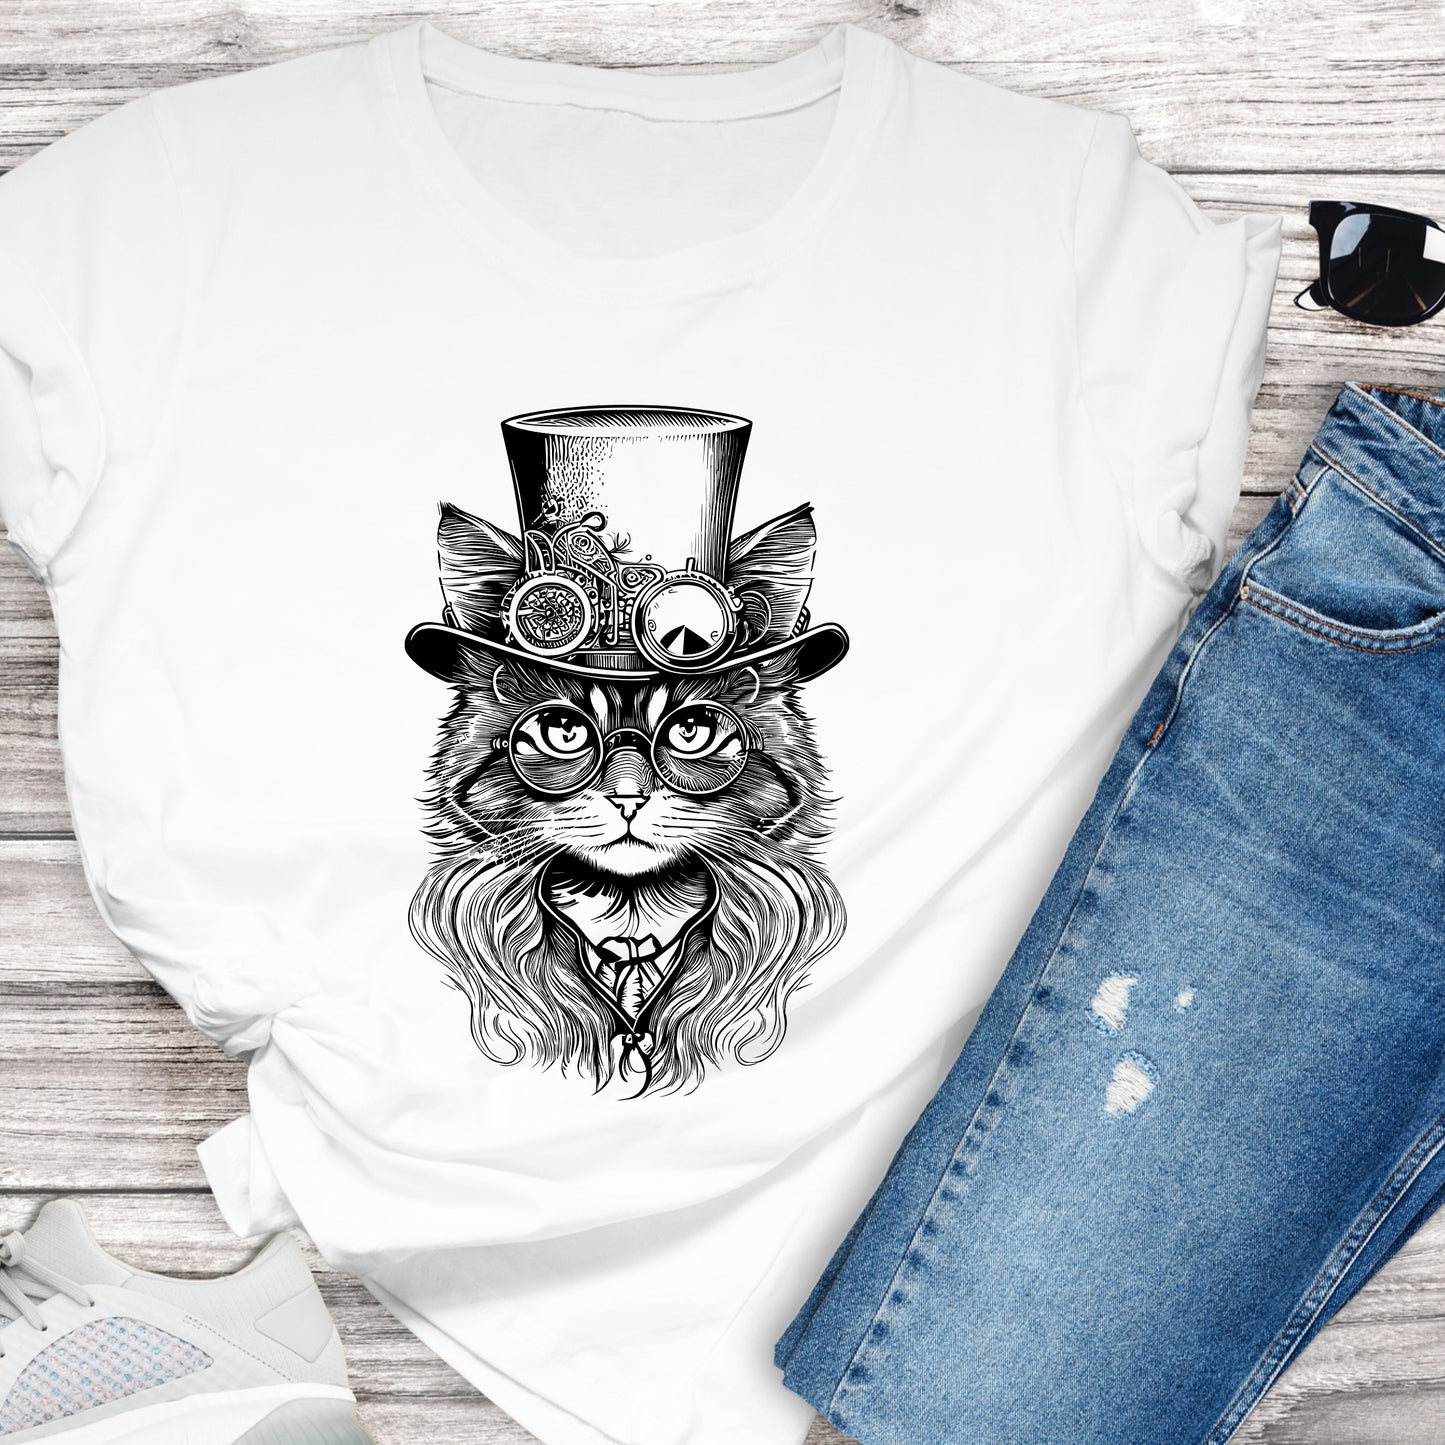 Steampunk Cat T-Shirt For Retro T Shirt For Science Fiction TShirt For Victorian Shirt For Wild West TShirt For Steam Punk Gift